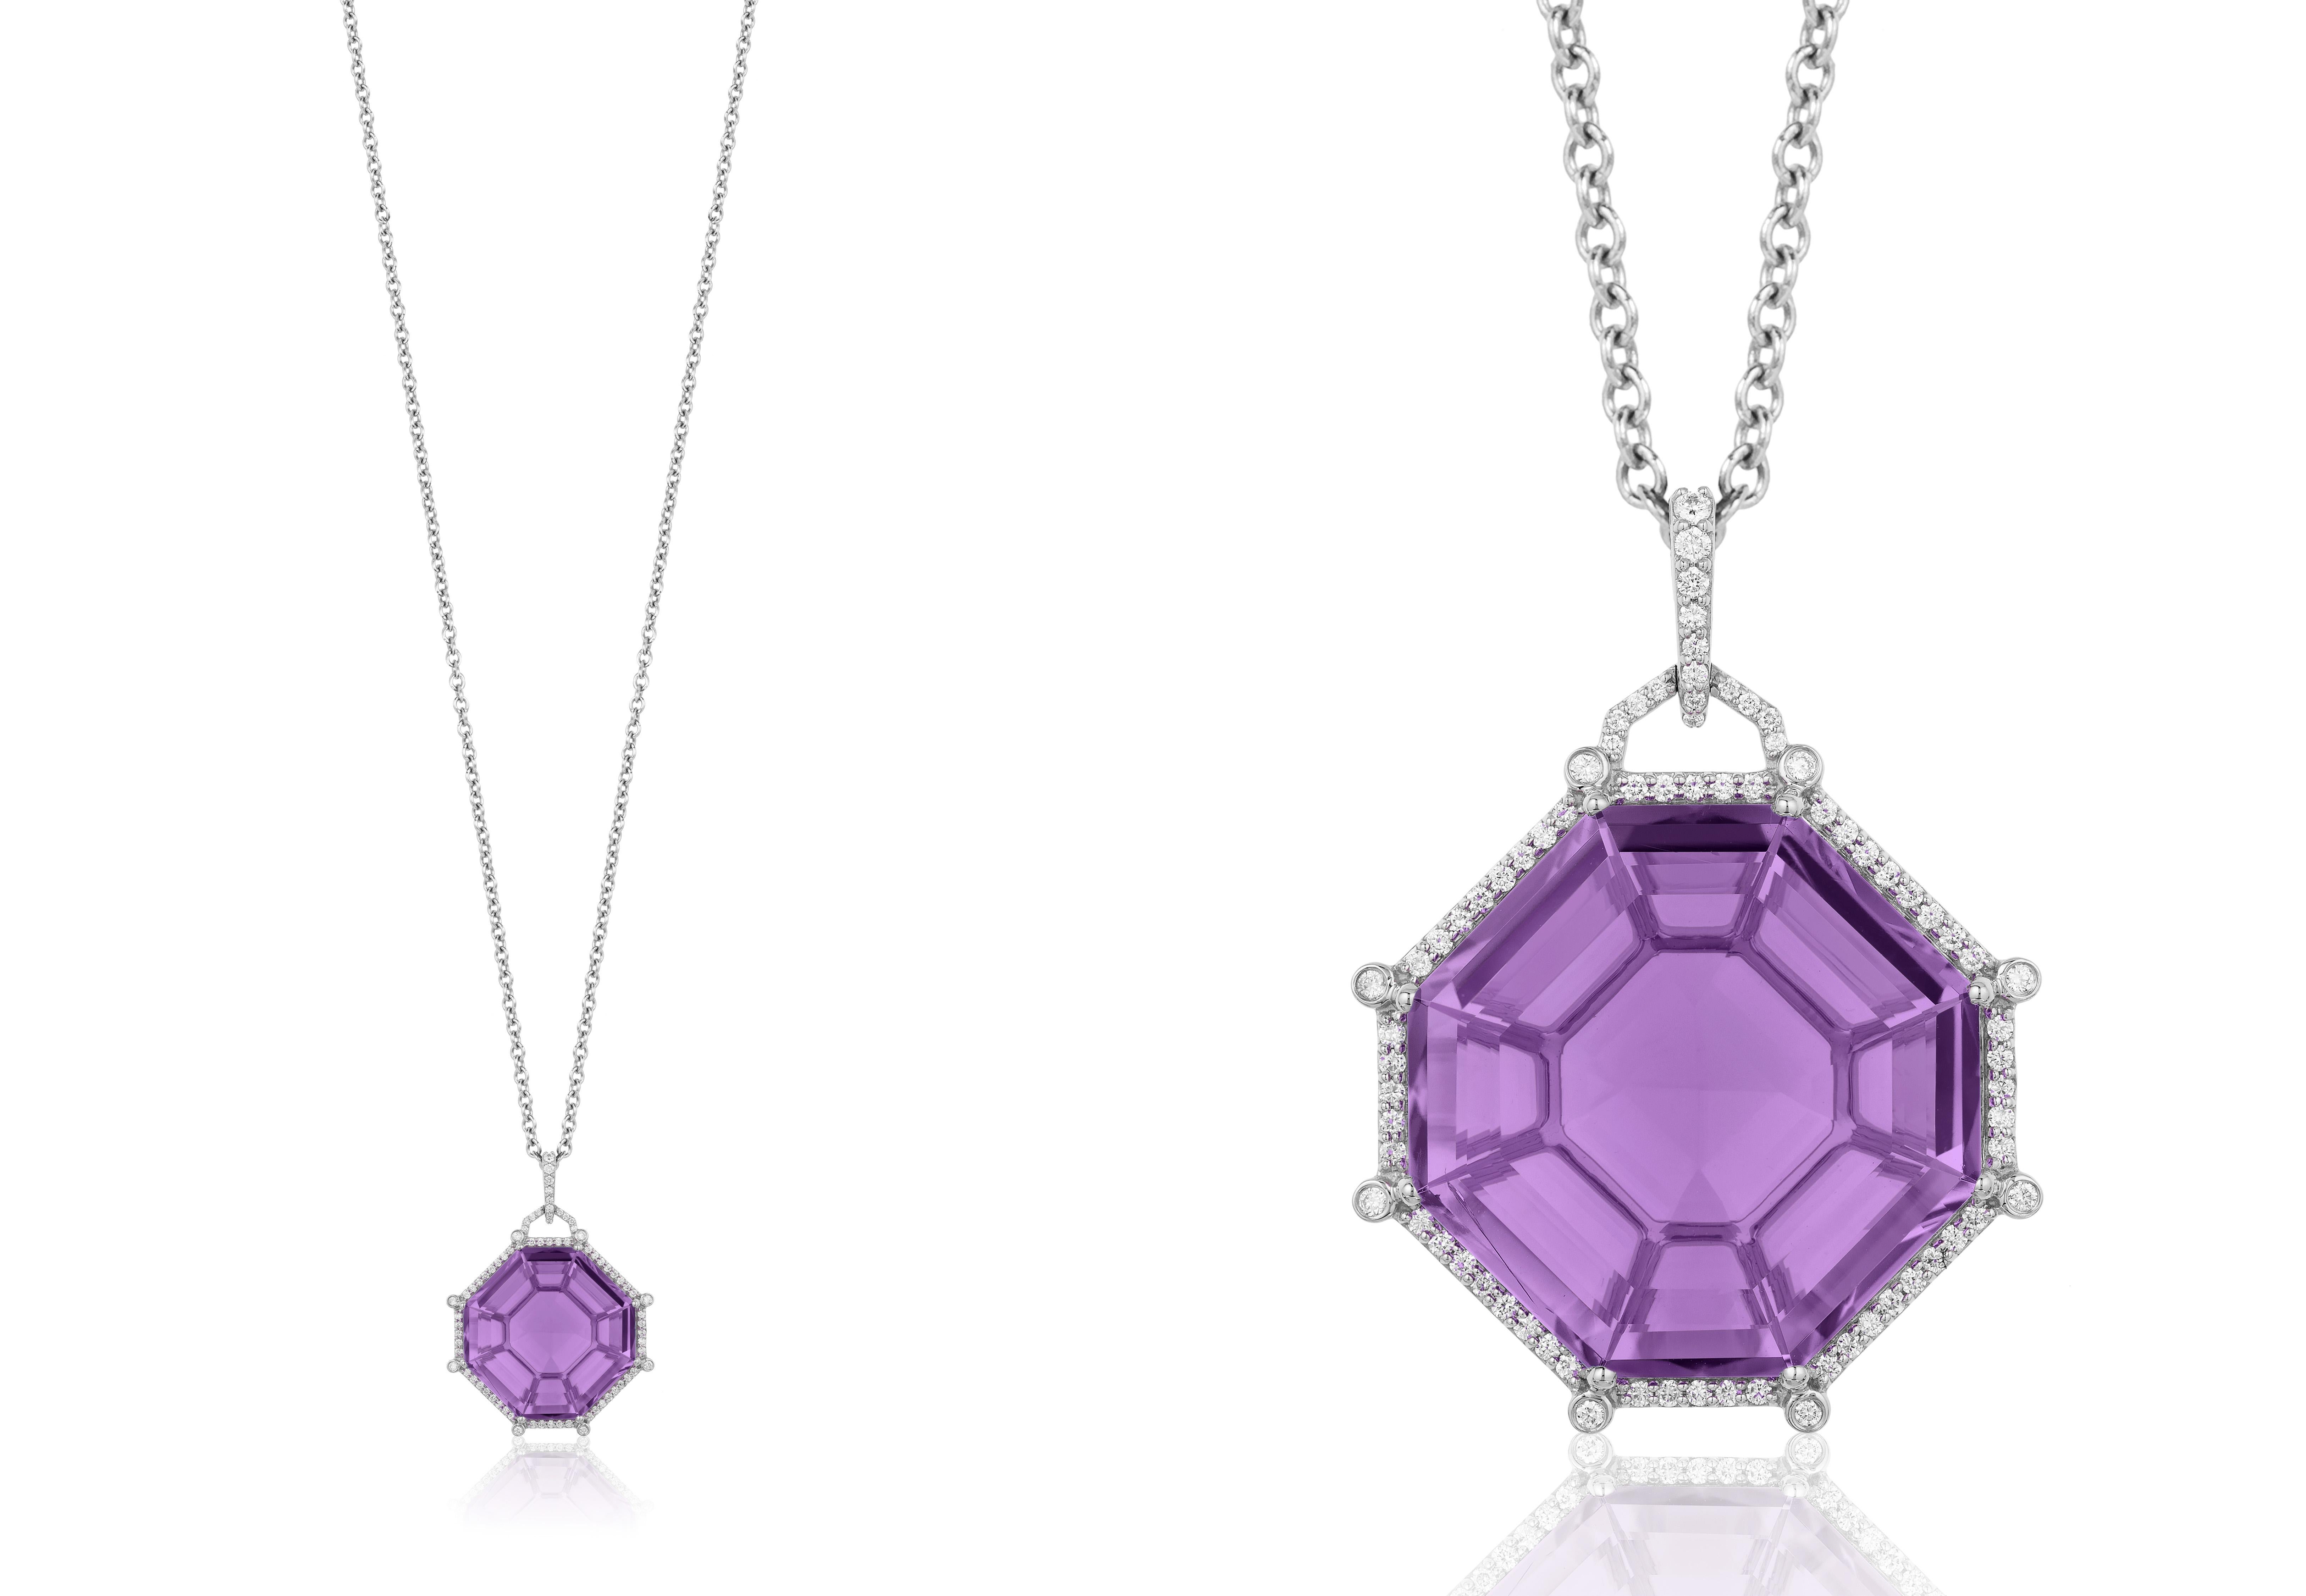 Amethyst Octagon Pendant with Diamonds in 18K White Gold from 'Gossip' Collection
Stone Size: 22.5 x 22.5 mm
Diamonds: G-H / VS, Approx Wt: 0.46 Cts